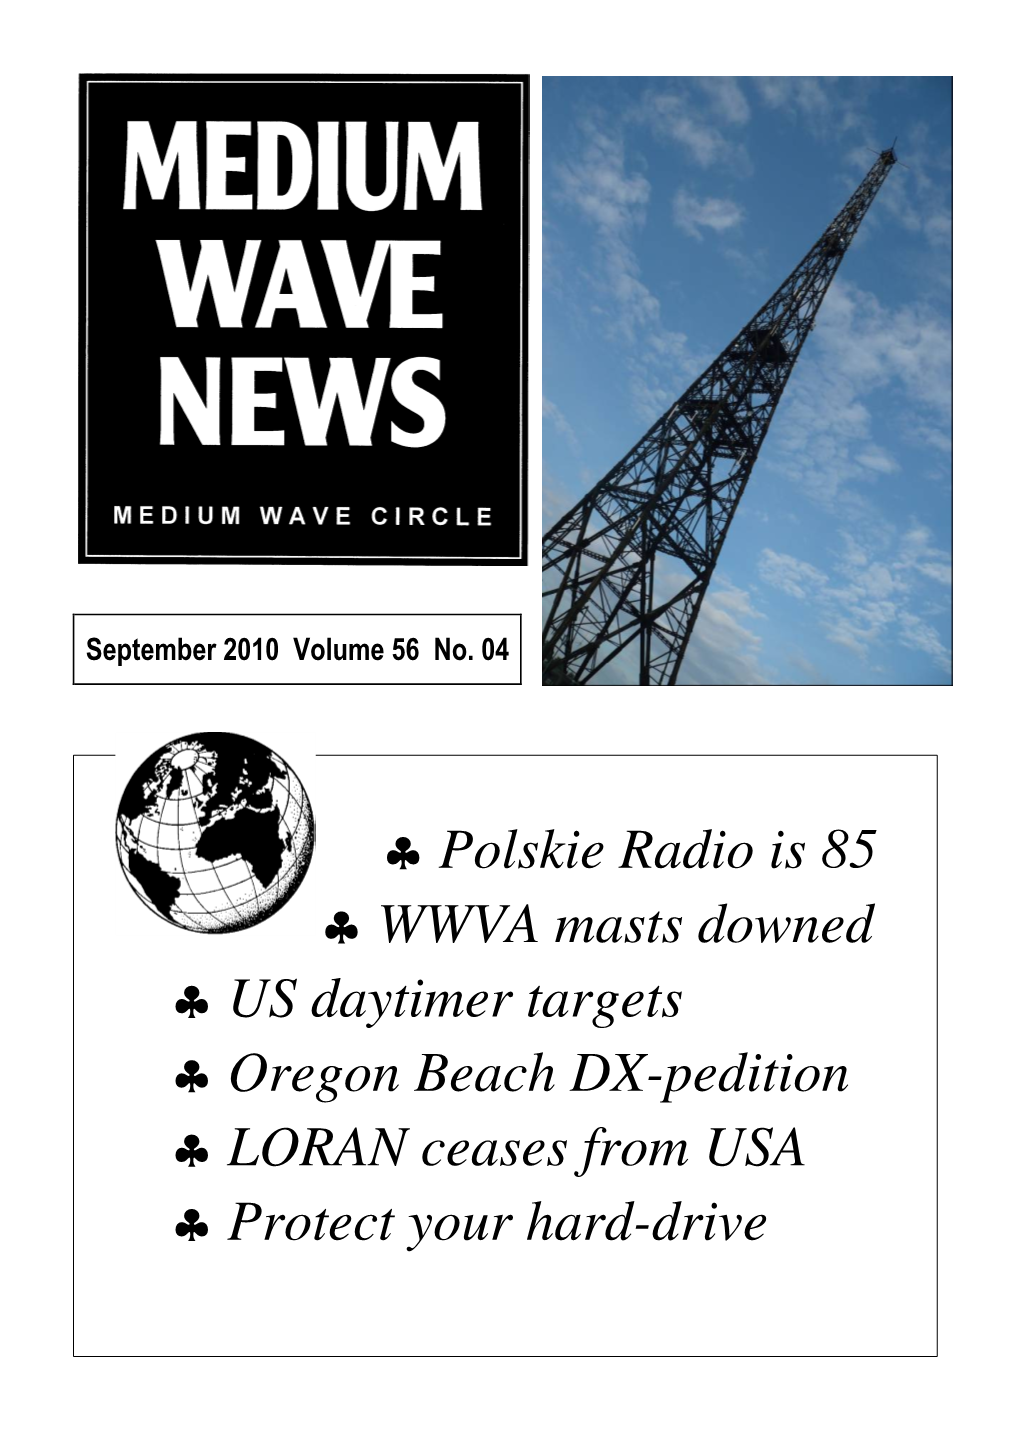 * Polskie Radio Is 85 * WWVA Masts Downed * US Daytimer Targets * Oregon Beach DX-Pedition * LORAN Ceases from USA * Protect